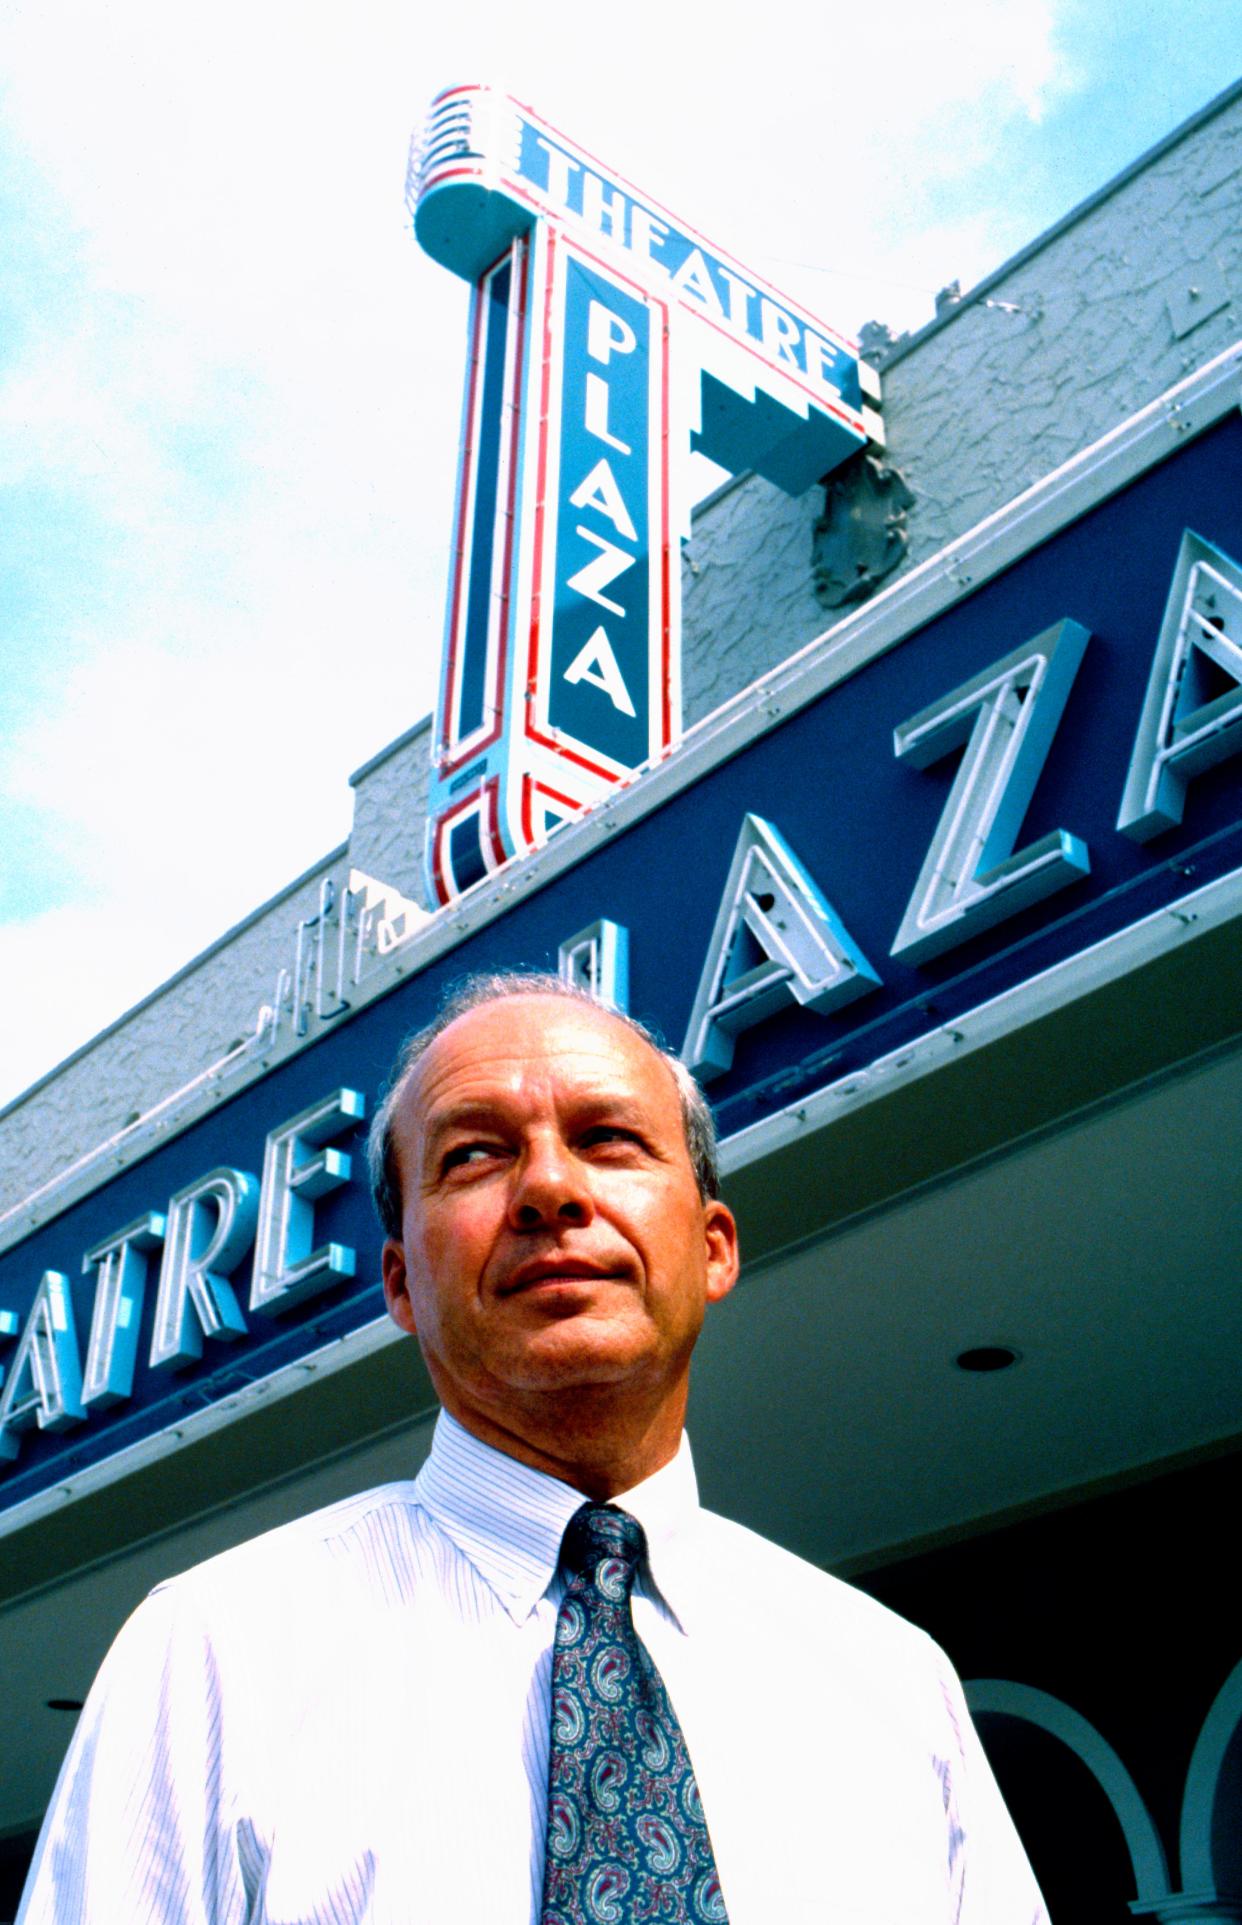 October 17, 1991 - Robert Brackett invested in downtown Vero Beach's future by completing phase one of the restoration of the Theatre Plaza, the former Vero and Florida theatres.